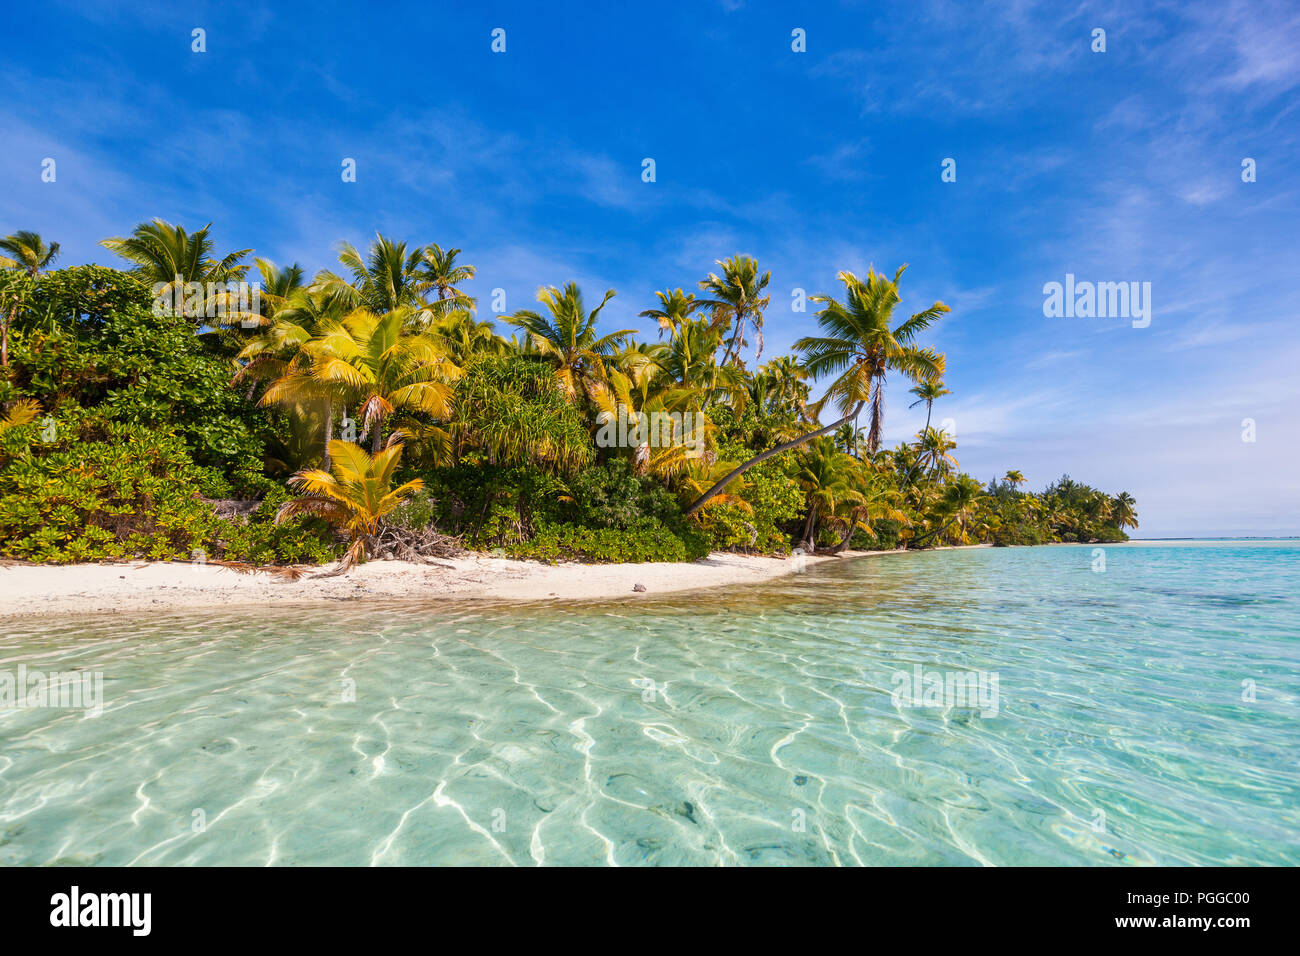 Stunning tropical Aitutaki One Foot island with palm trees, white sand, turquoise ocean water and blue sky at Cook Islands, South Pacific Stock Photo